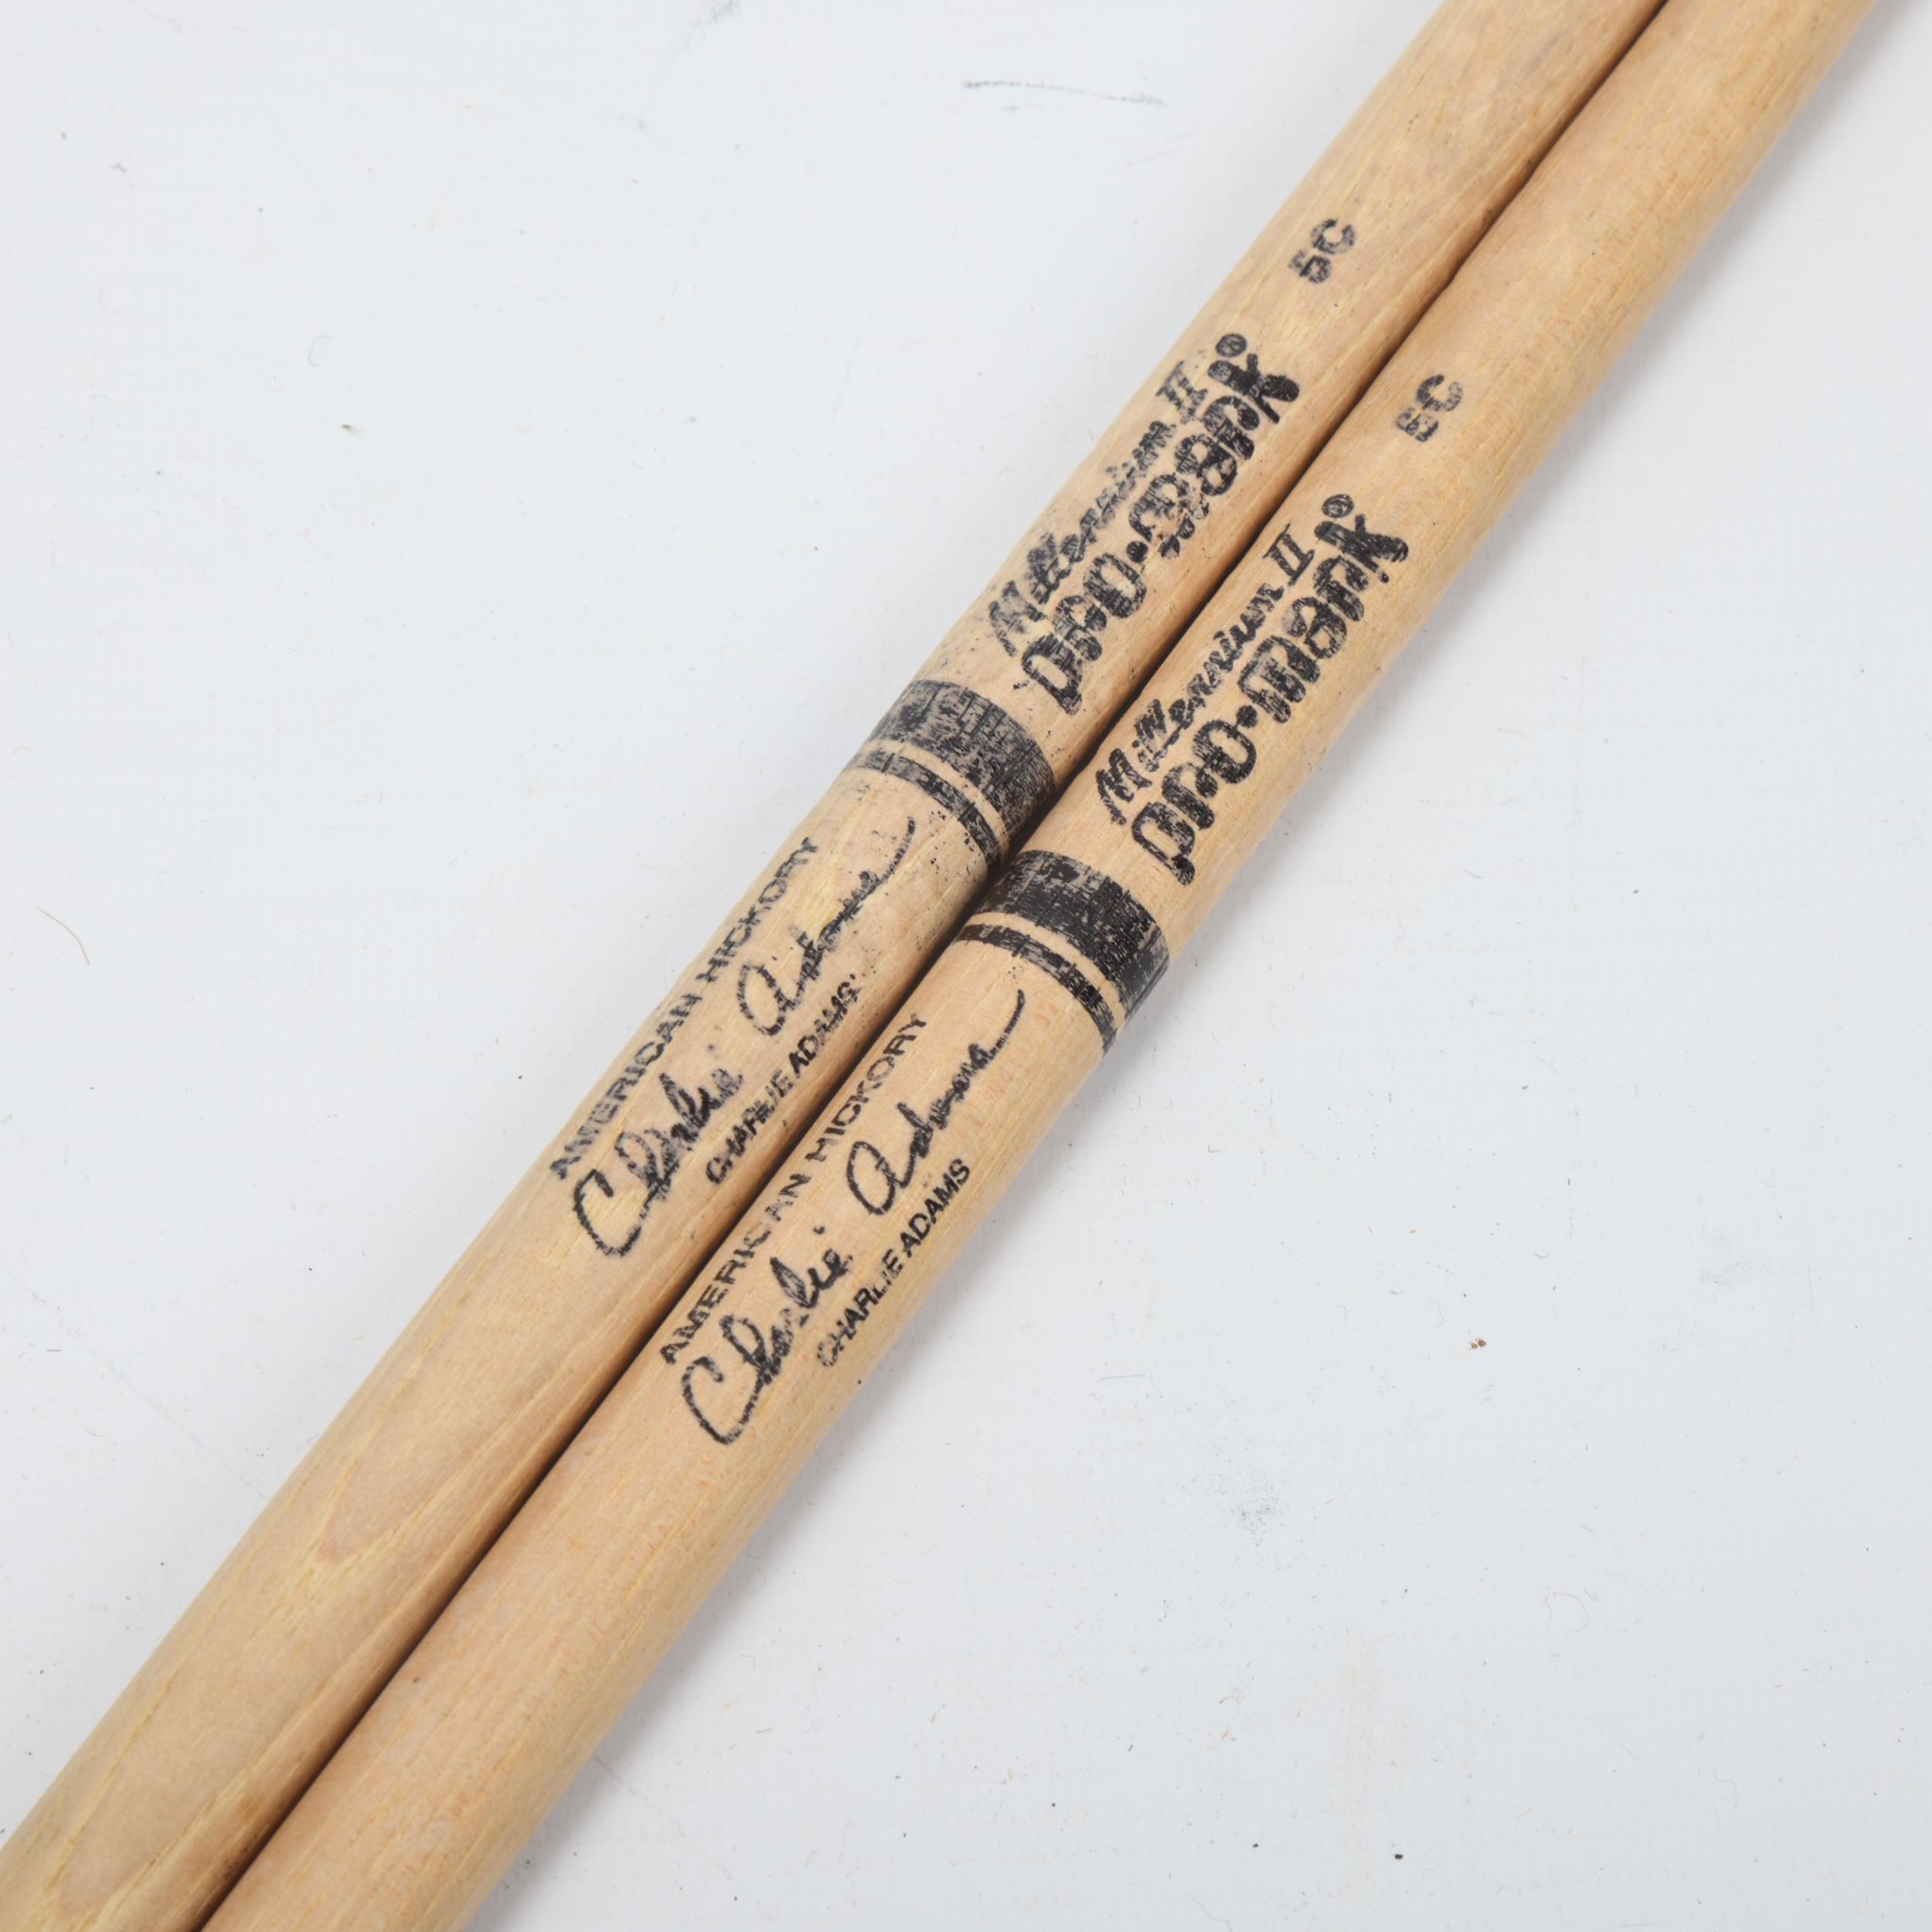 Two USED PROMARK 'CHARLIE ADAMS 5C' Hickory DRUMSTICKS belonging to MITCH MITCHELL - Image 2 of 3